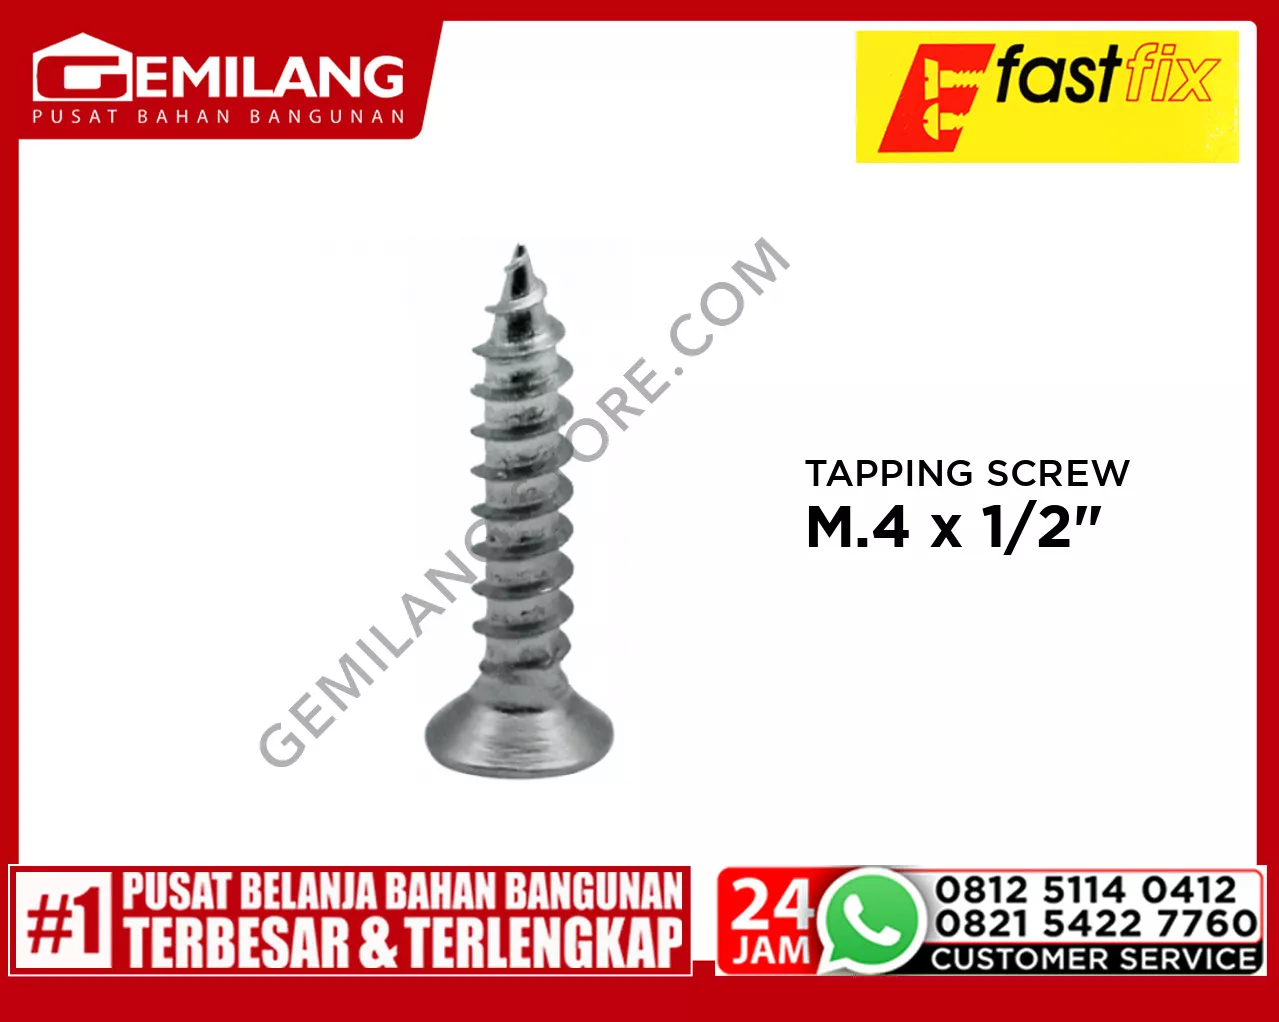 CSK TAPPING SCREW M.4 x 1/2nch 50pc